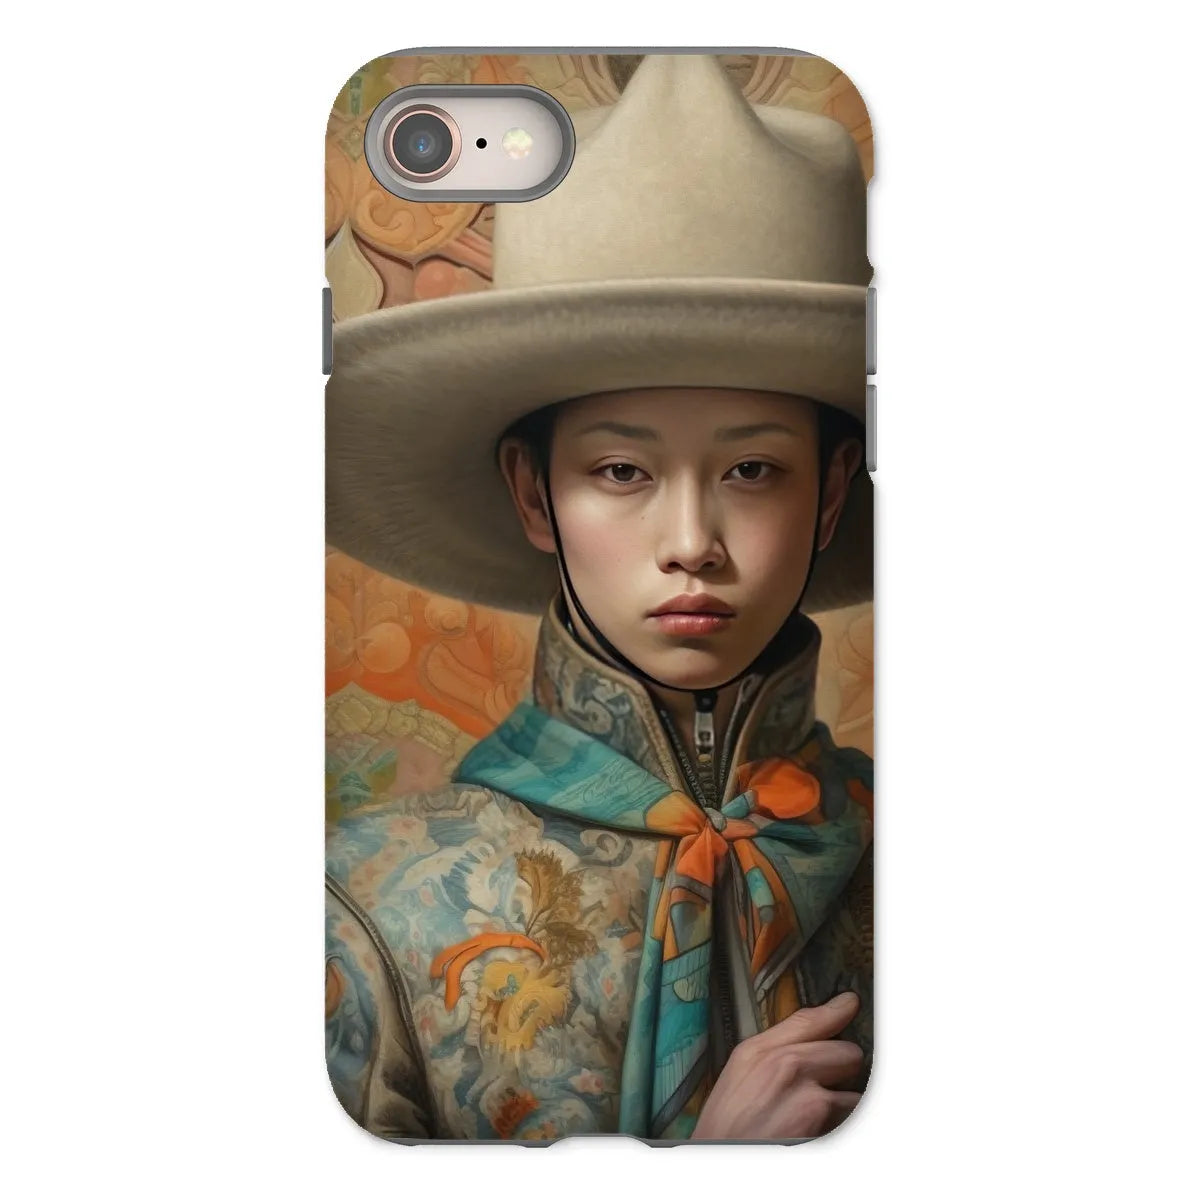 Xiang - Gaysian Chinese Cowboy Aesthetic Art Phone Case - Iphone 8 / Matte - Mobile Phone Cases - Aesthetic Art